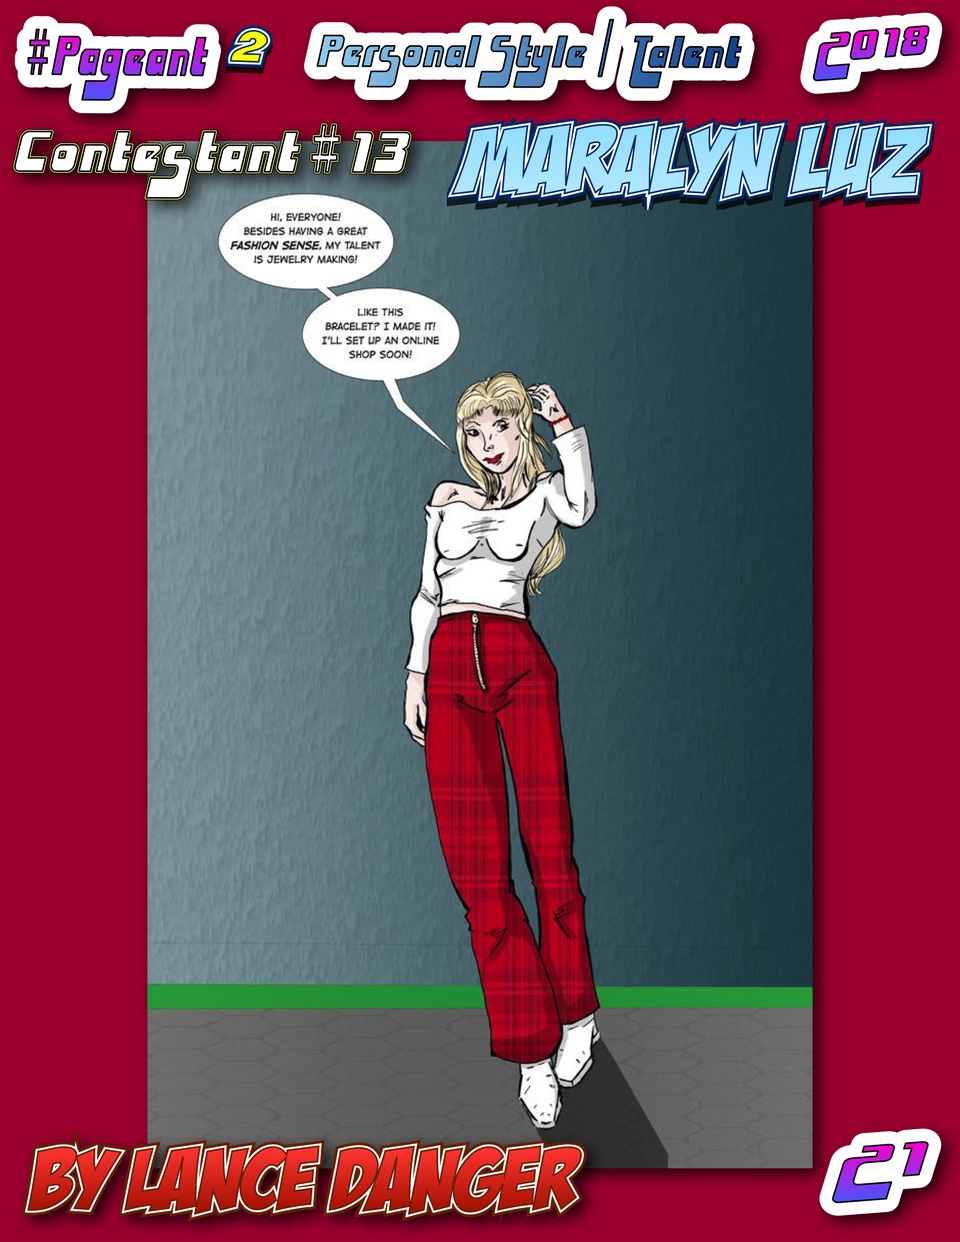 #Pageant #2 Pg. 21 : Personal Style / Talent Category : Contestant #13 : Maralyn Luz